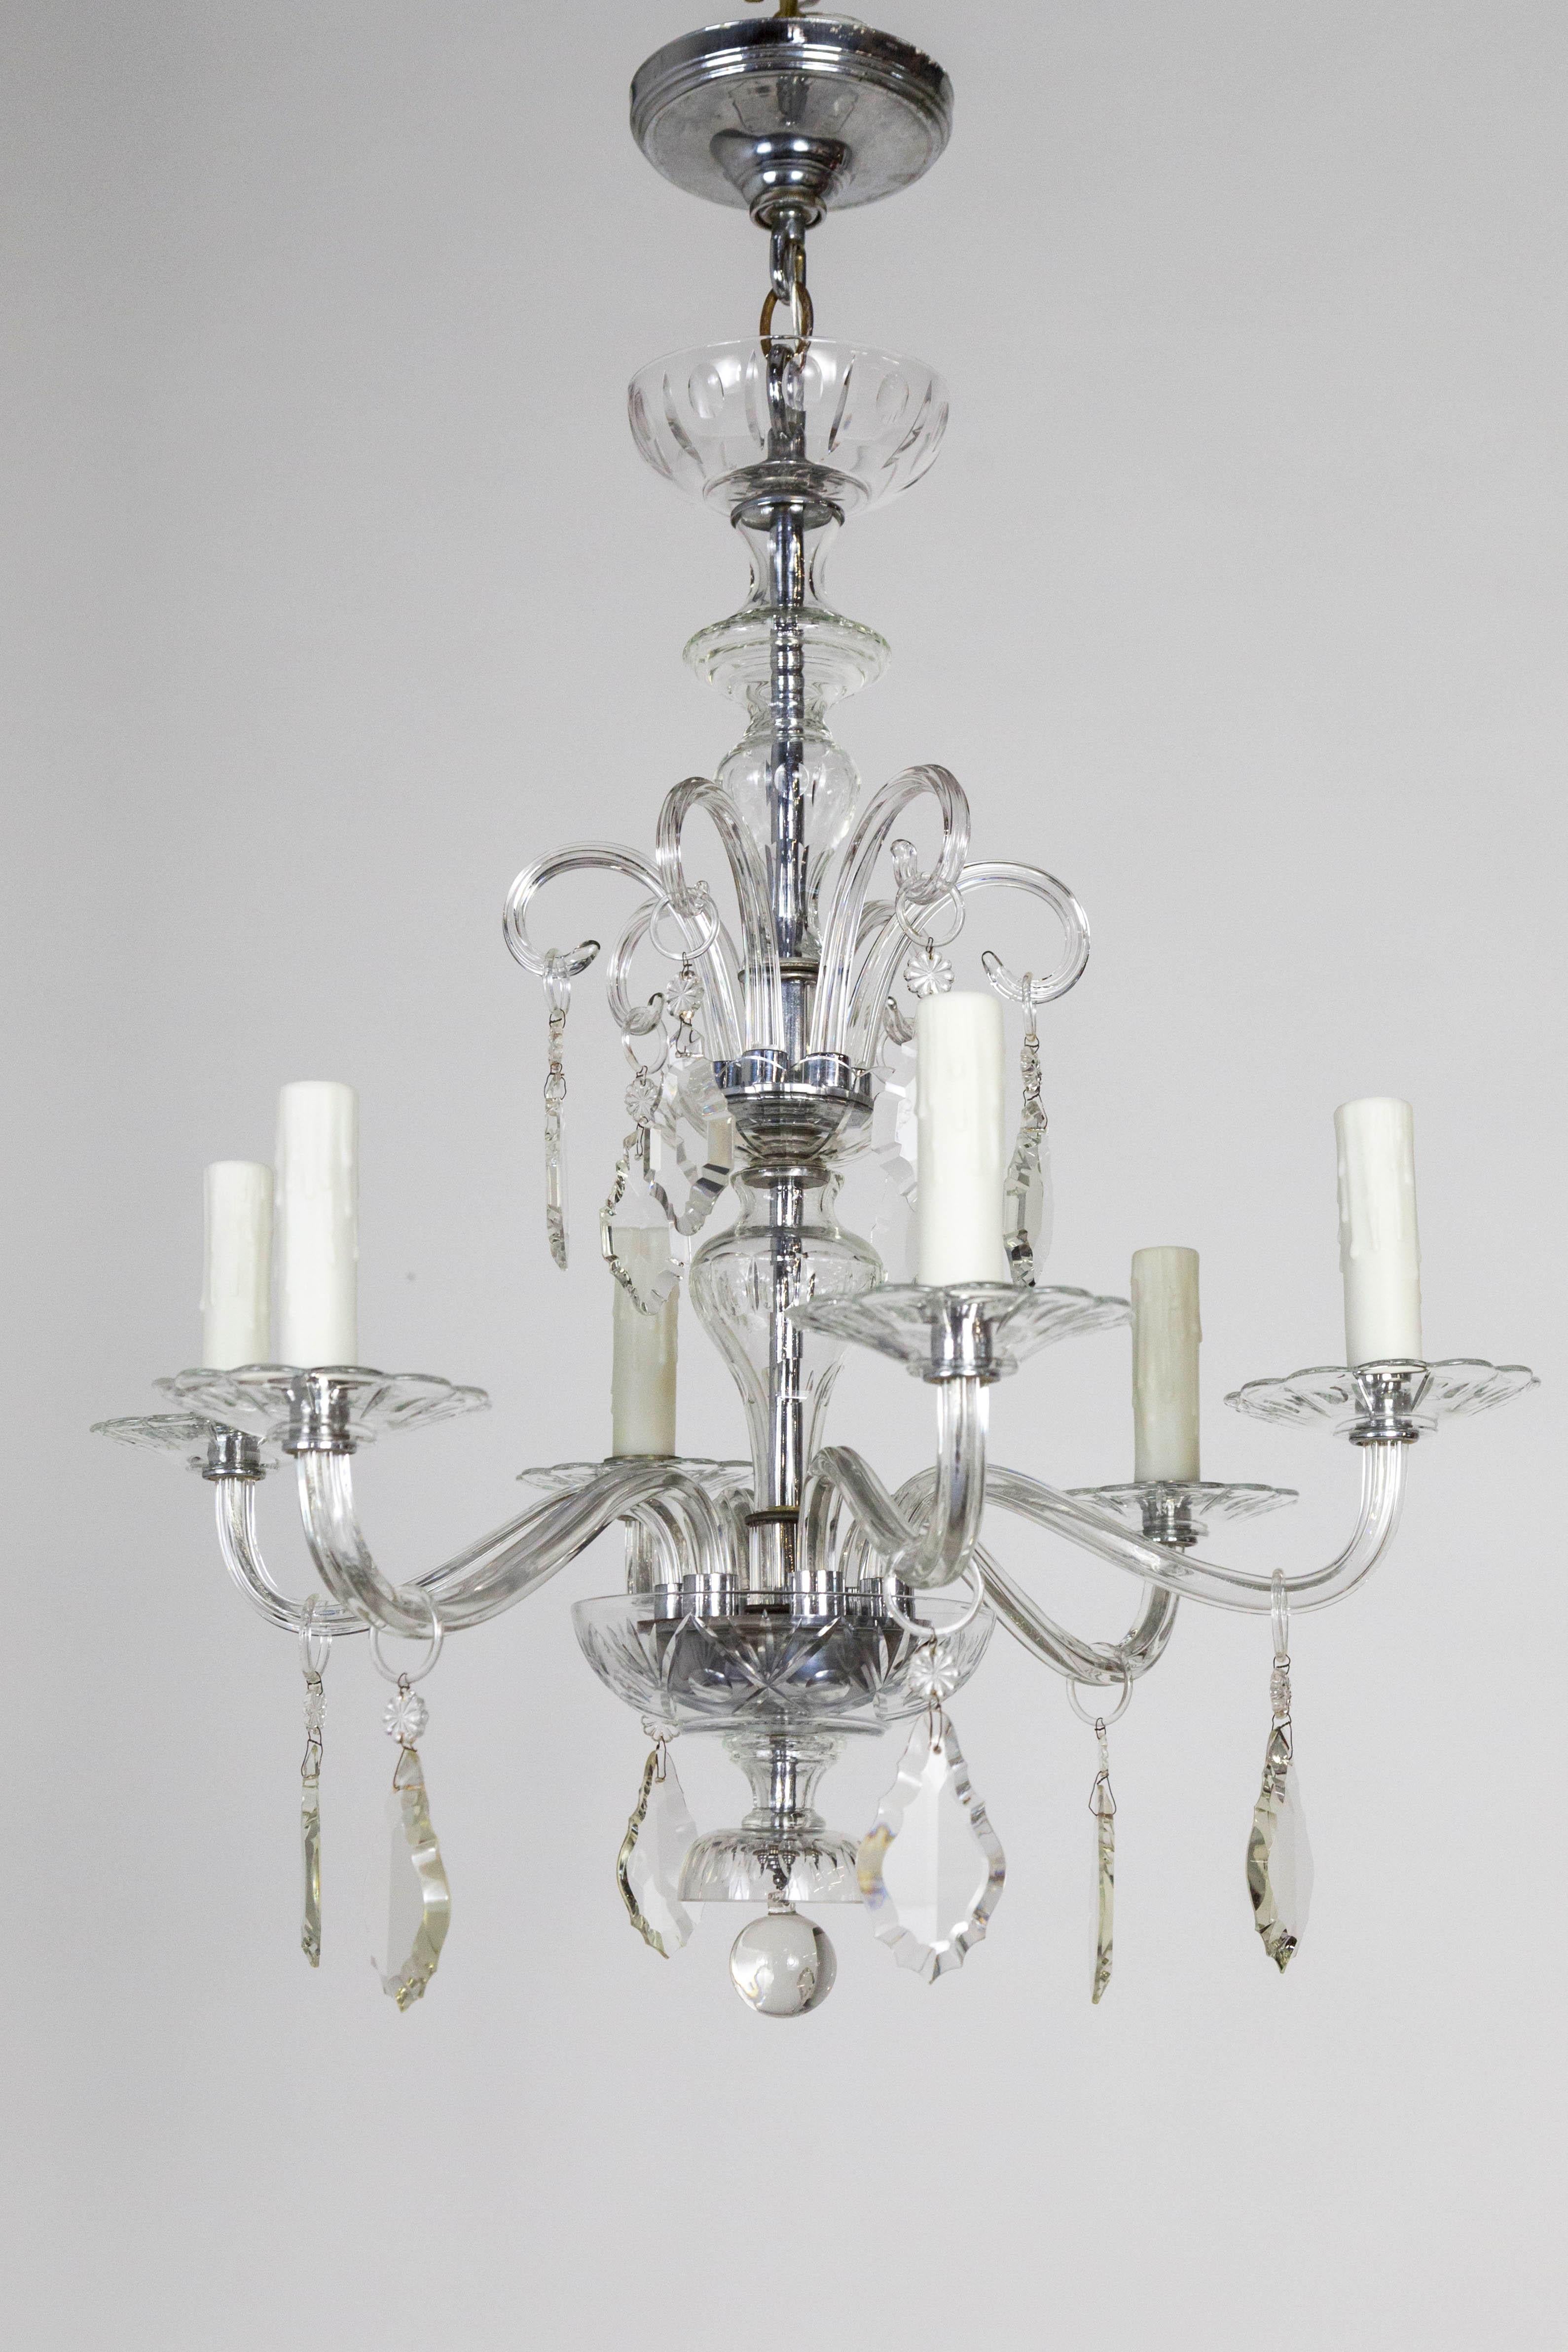 Petite 1920s Glass & Crystal Chandelier with Chrome Accents 5